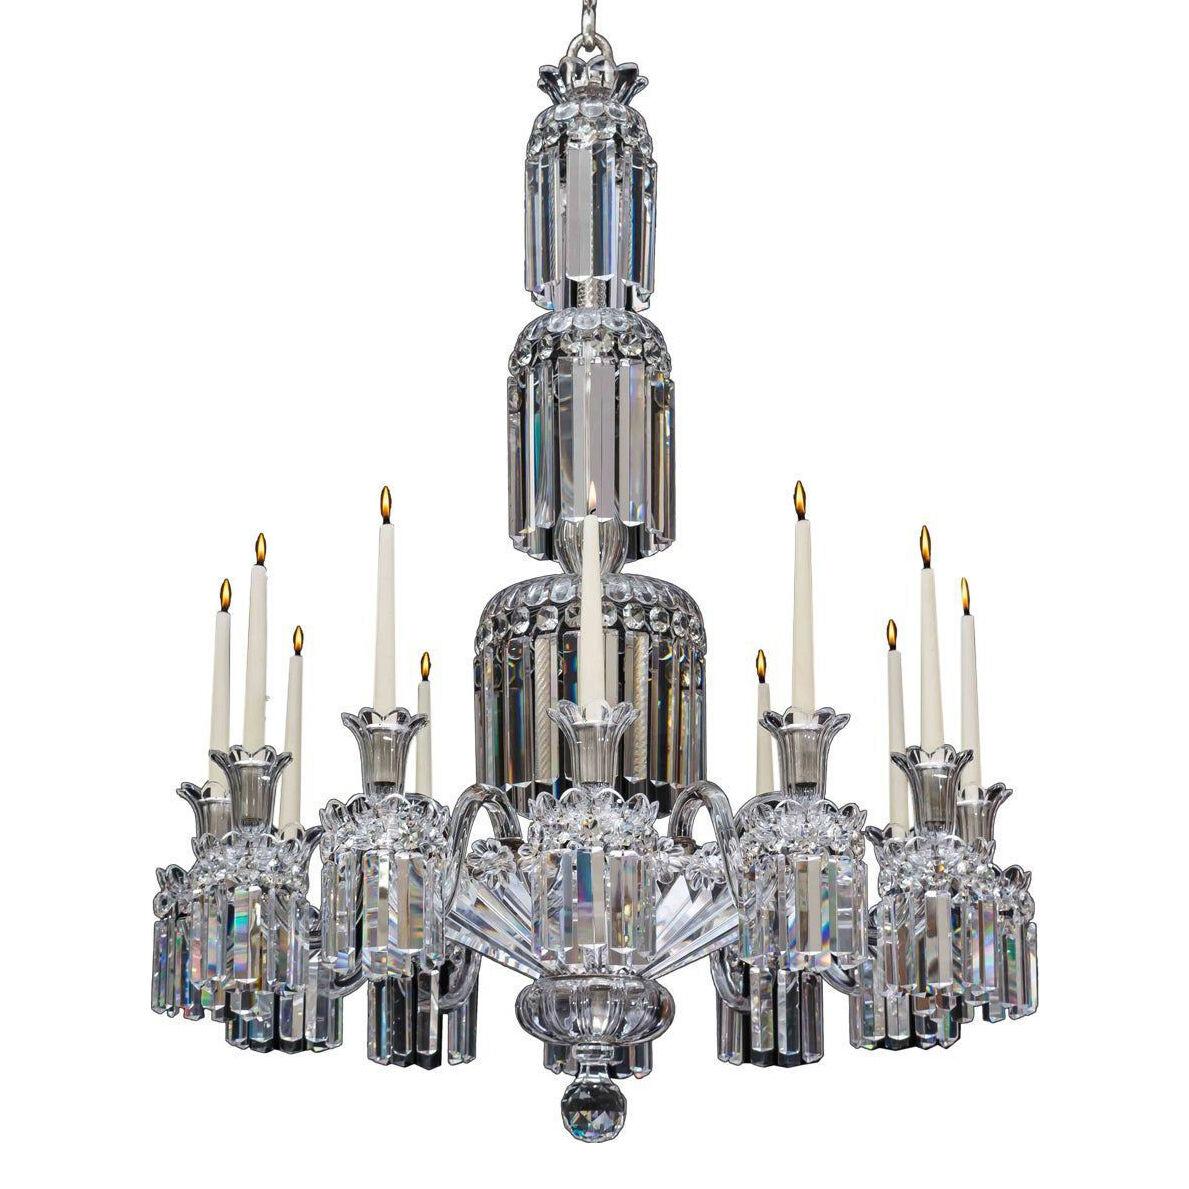 Twelve-Light William IV Crystal Chandelier Attributed to Perry & Co